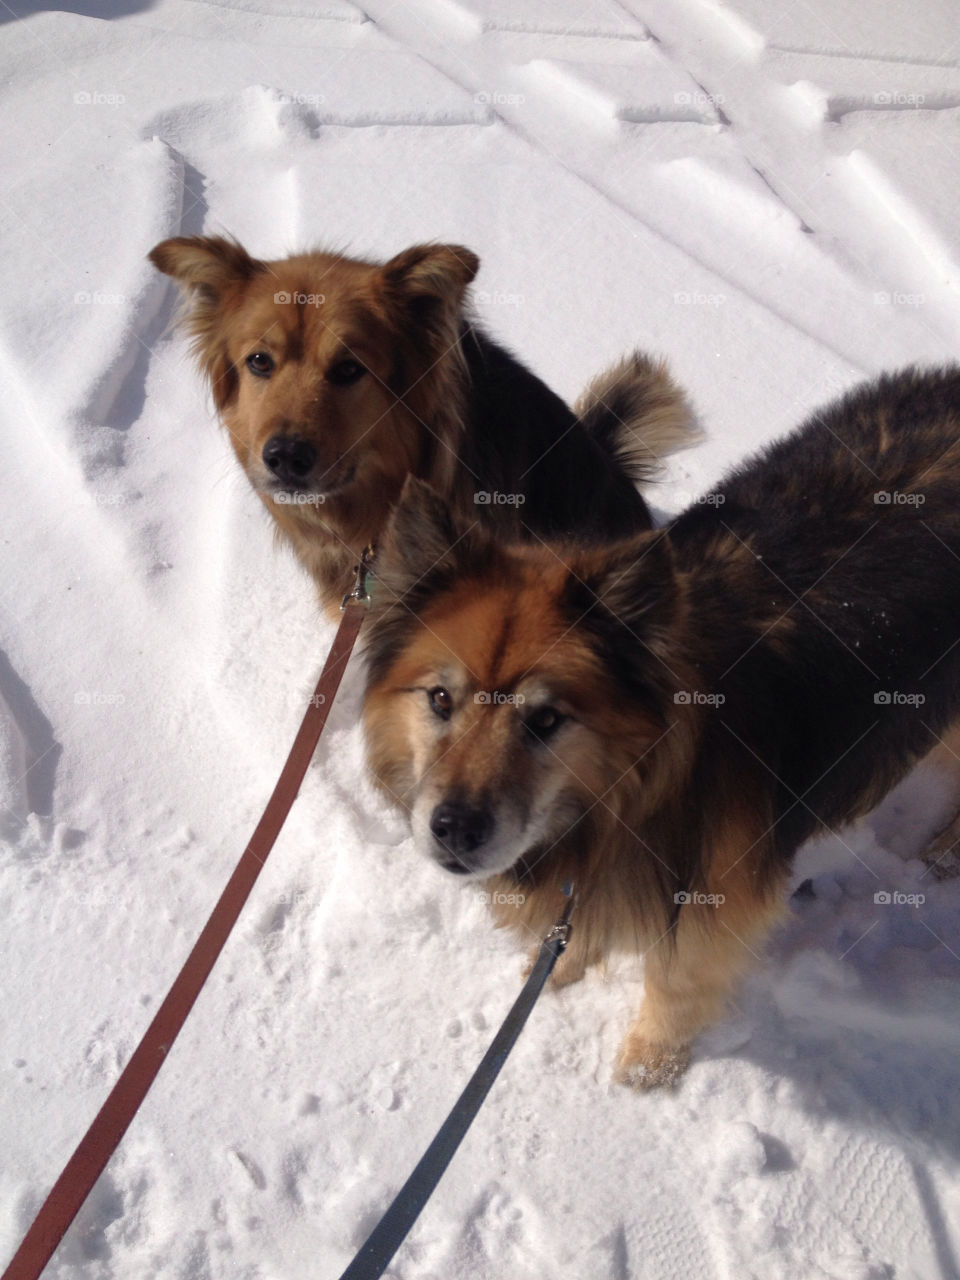 Furry dogs in the snow